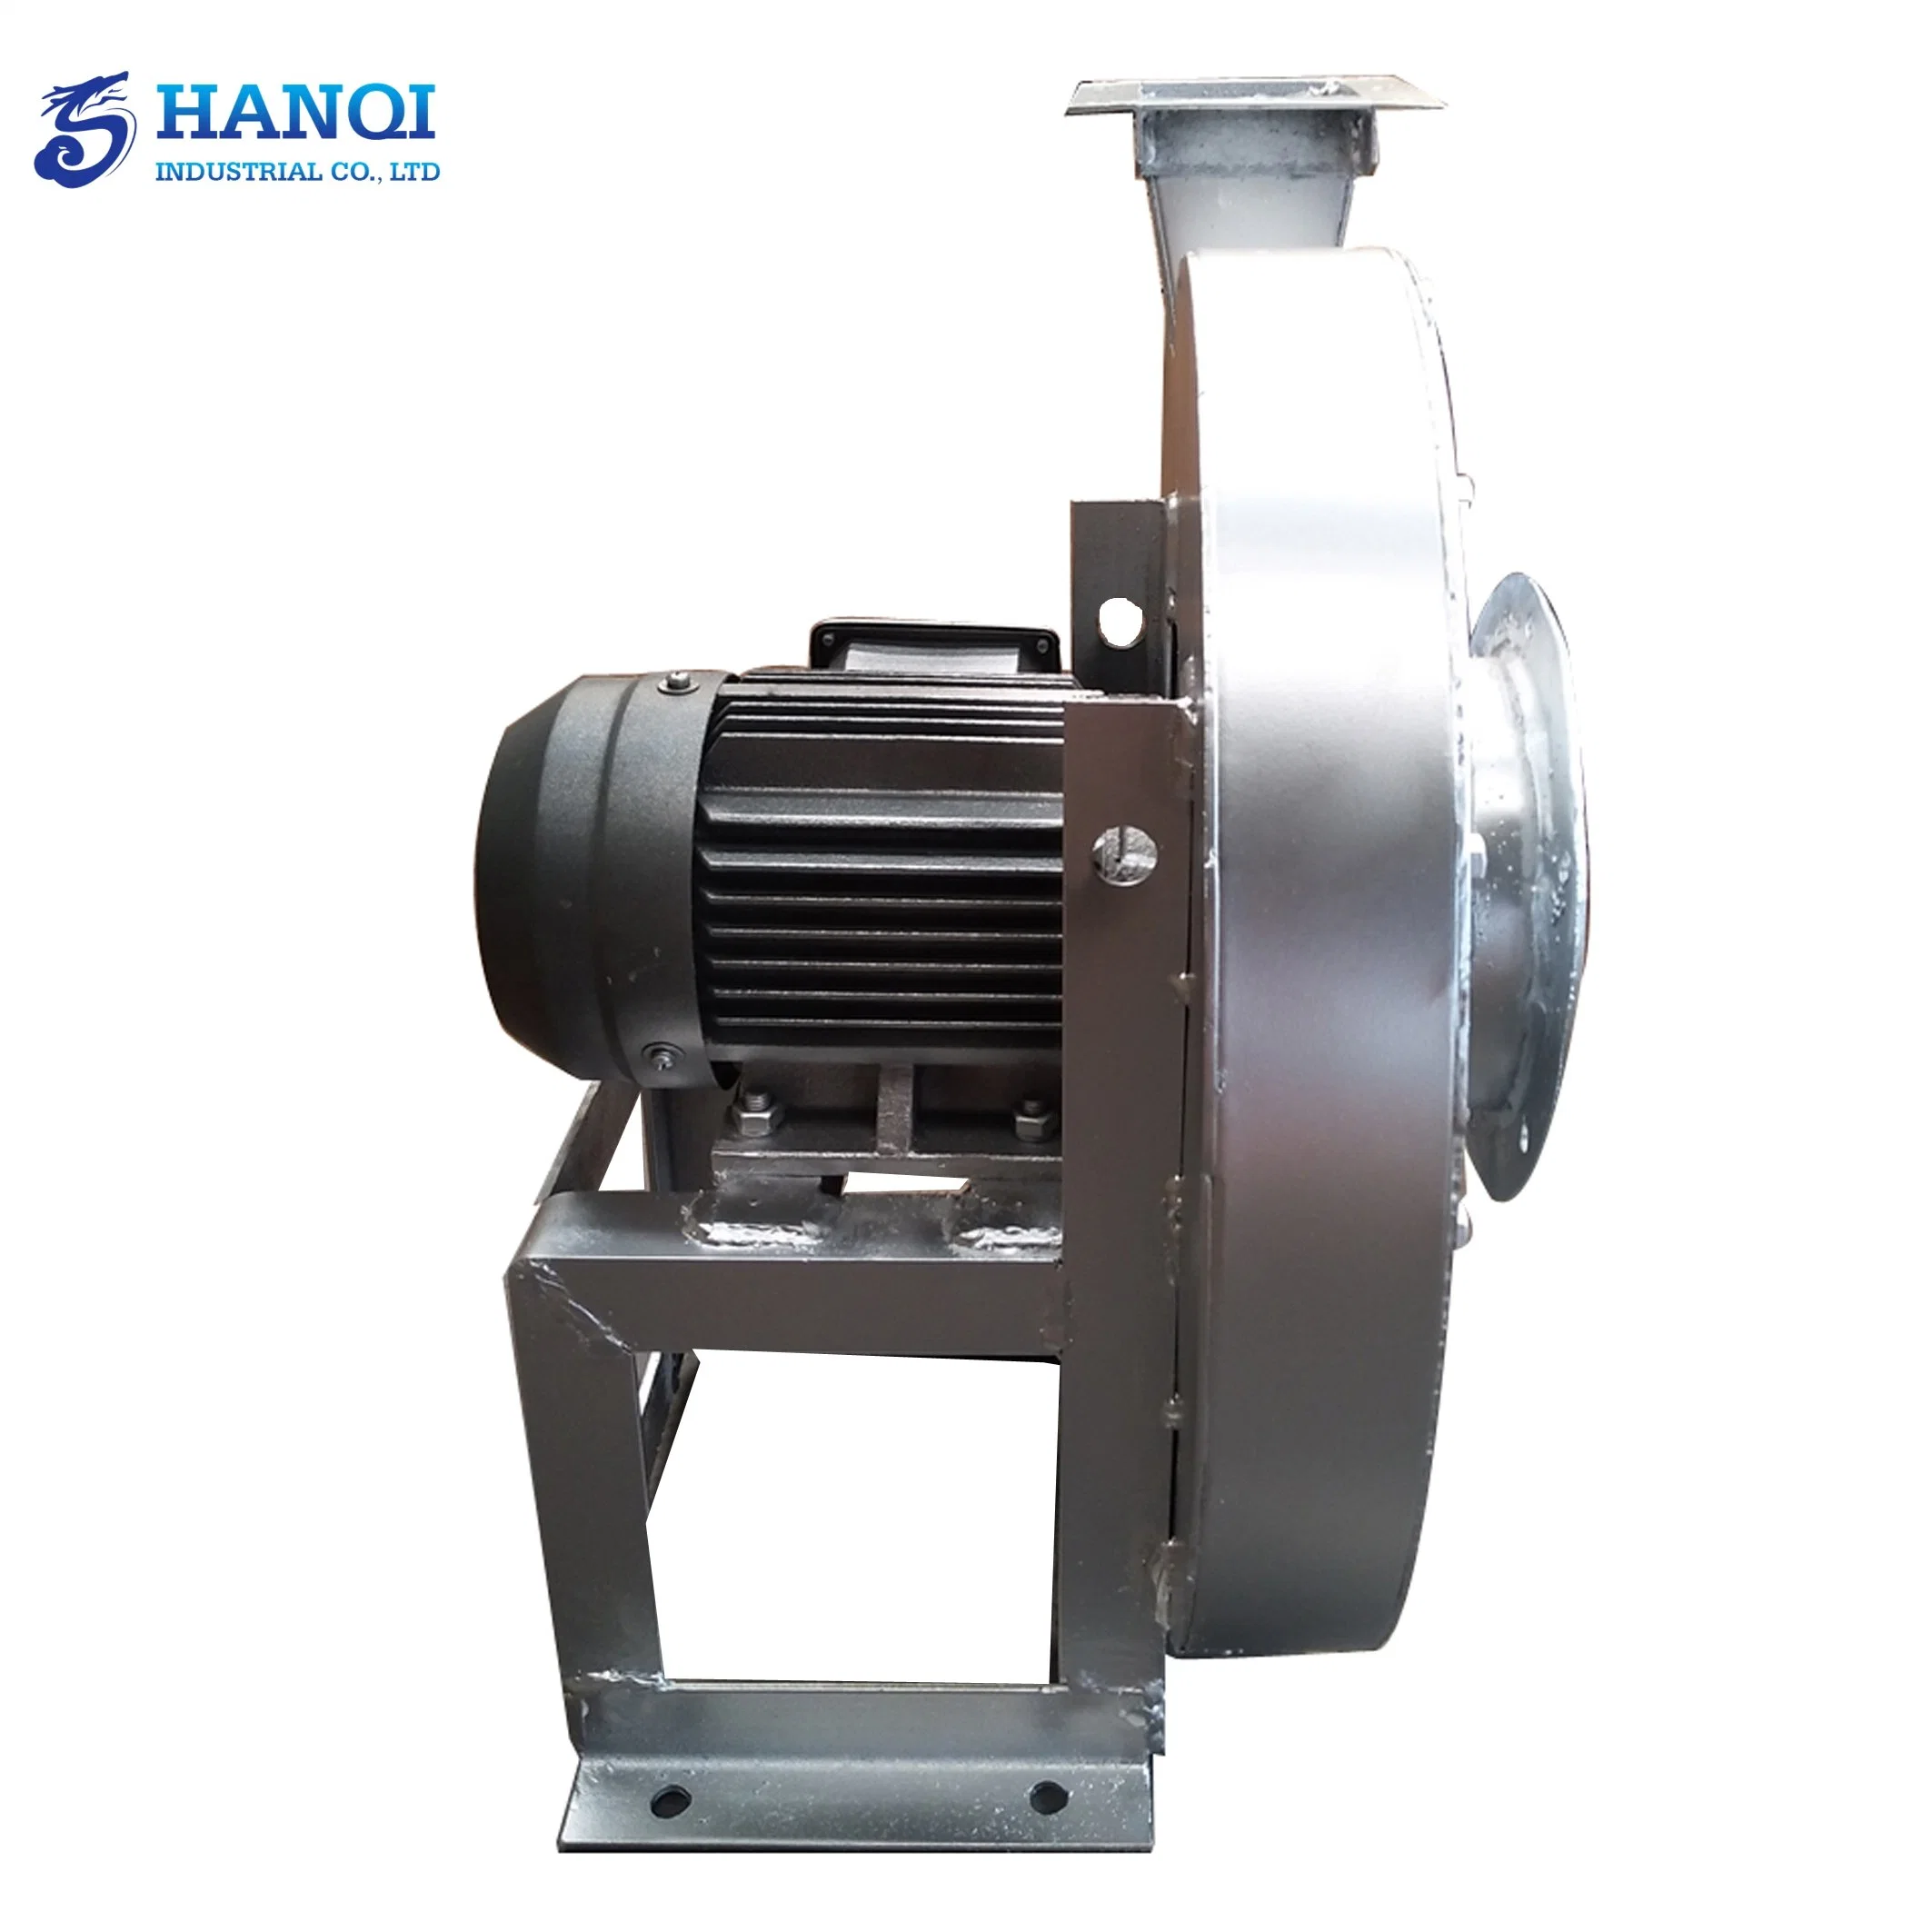 High Pressure Industrial Centrifugal Blower Ventilation Fan for Chemicalin Dustry